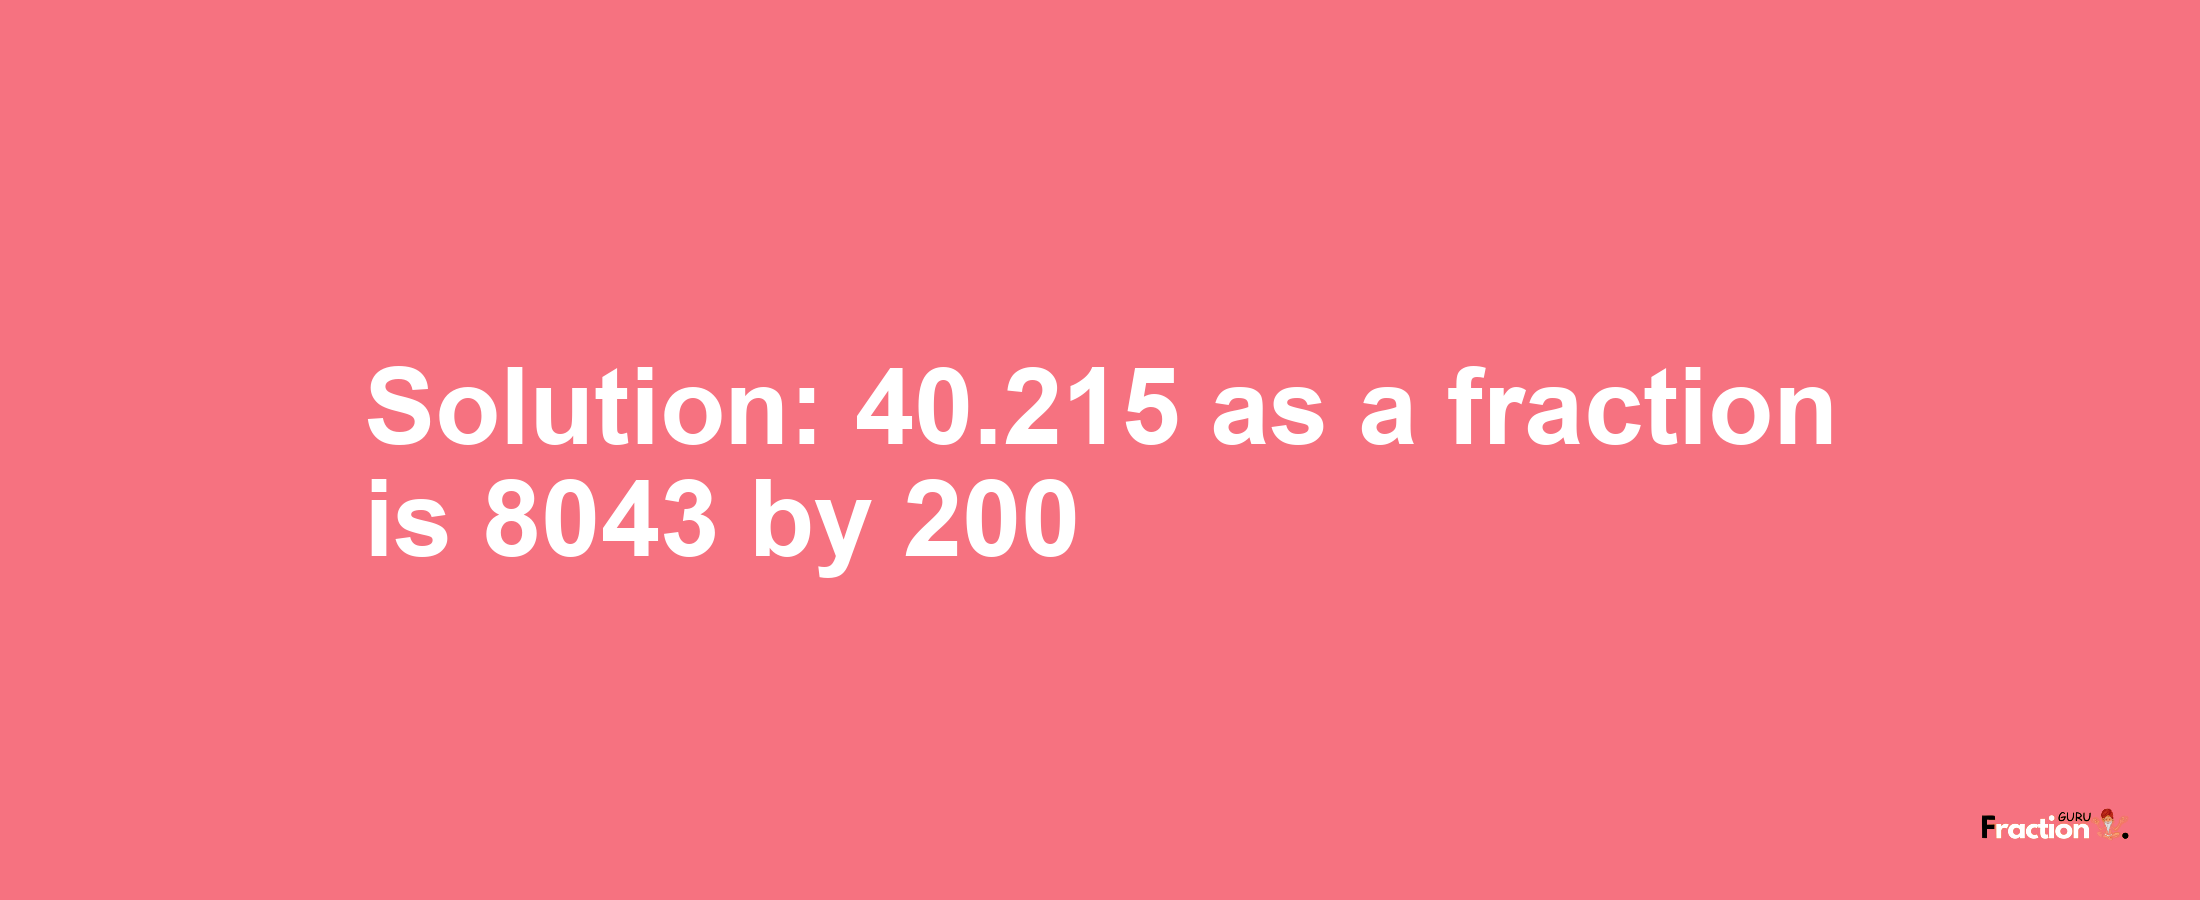 Solution:40.215 as a fraction is 8043/200